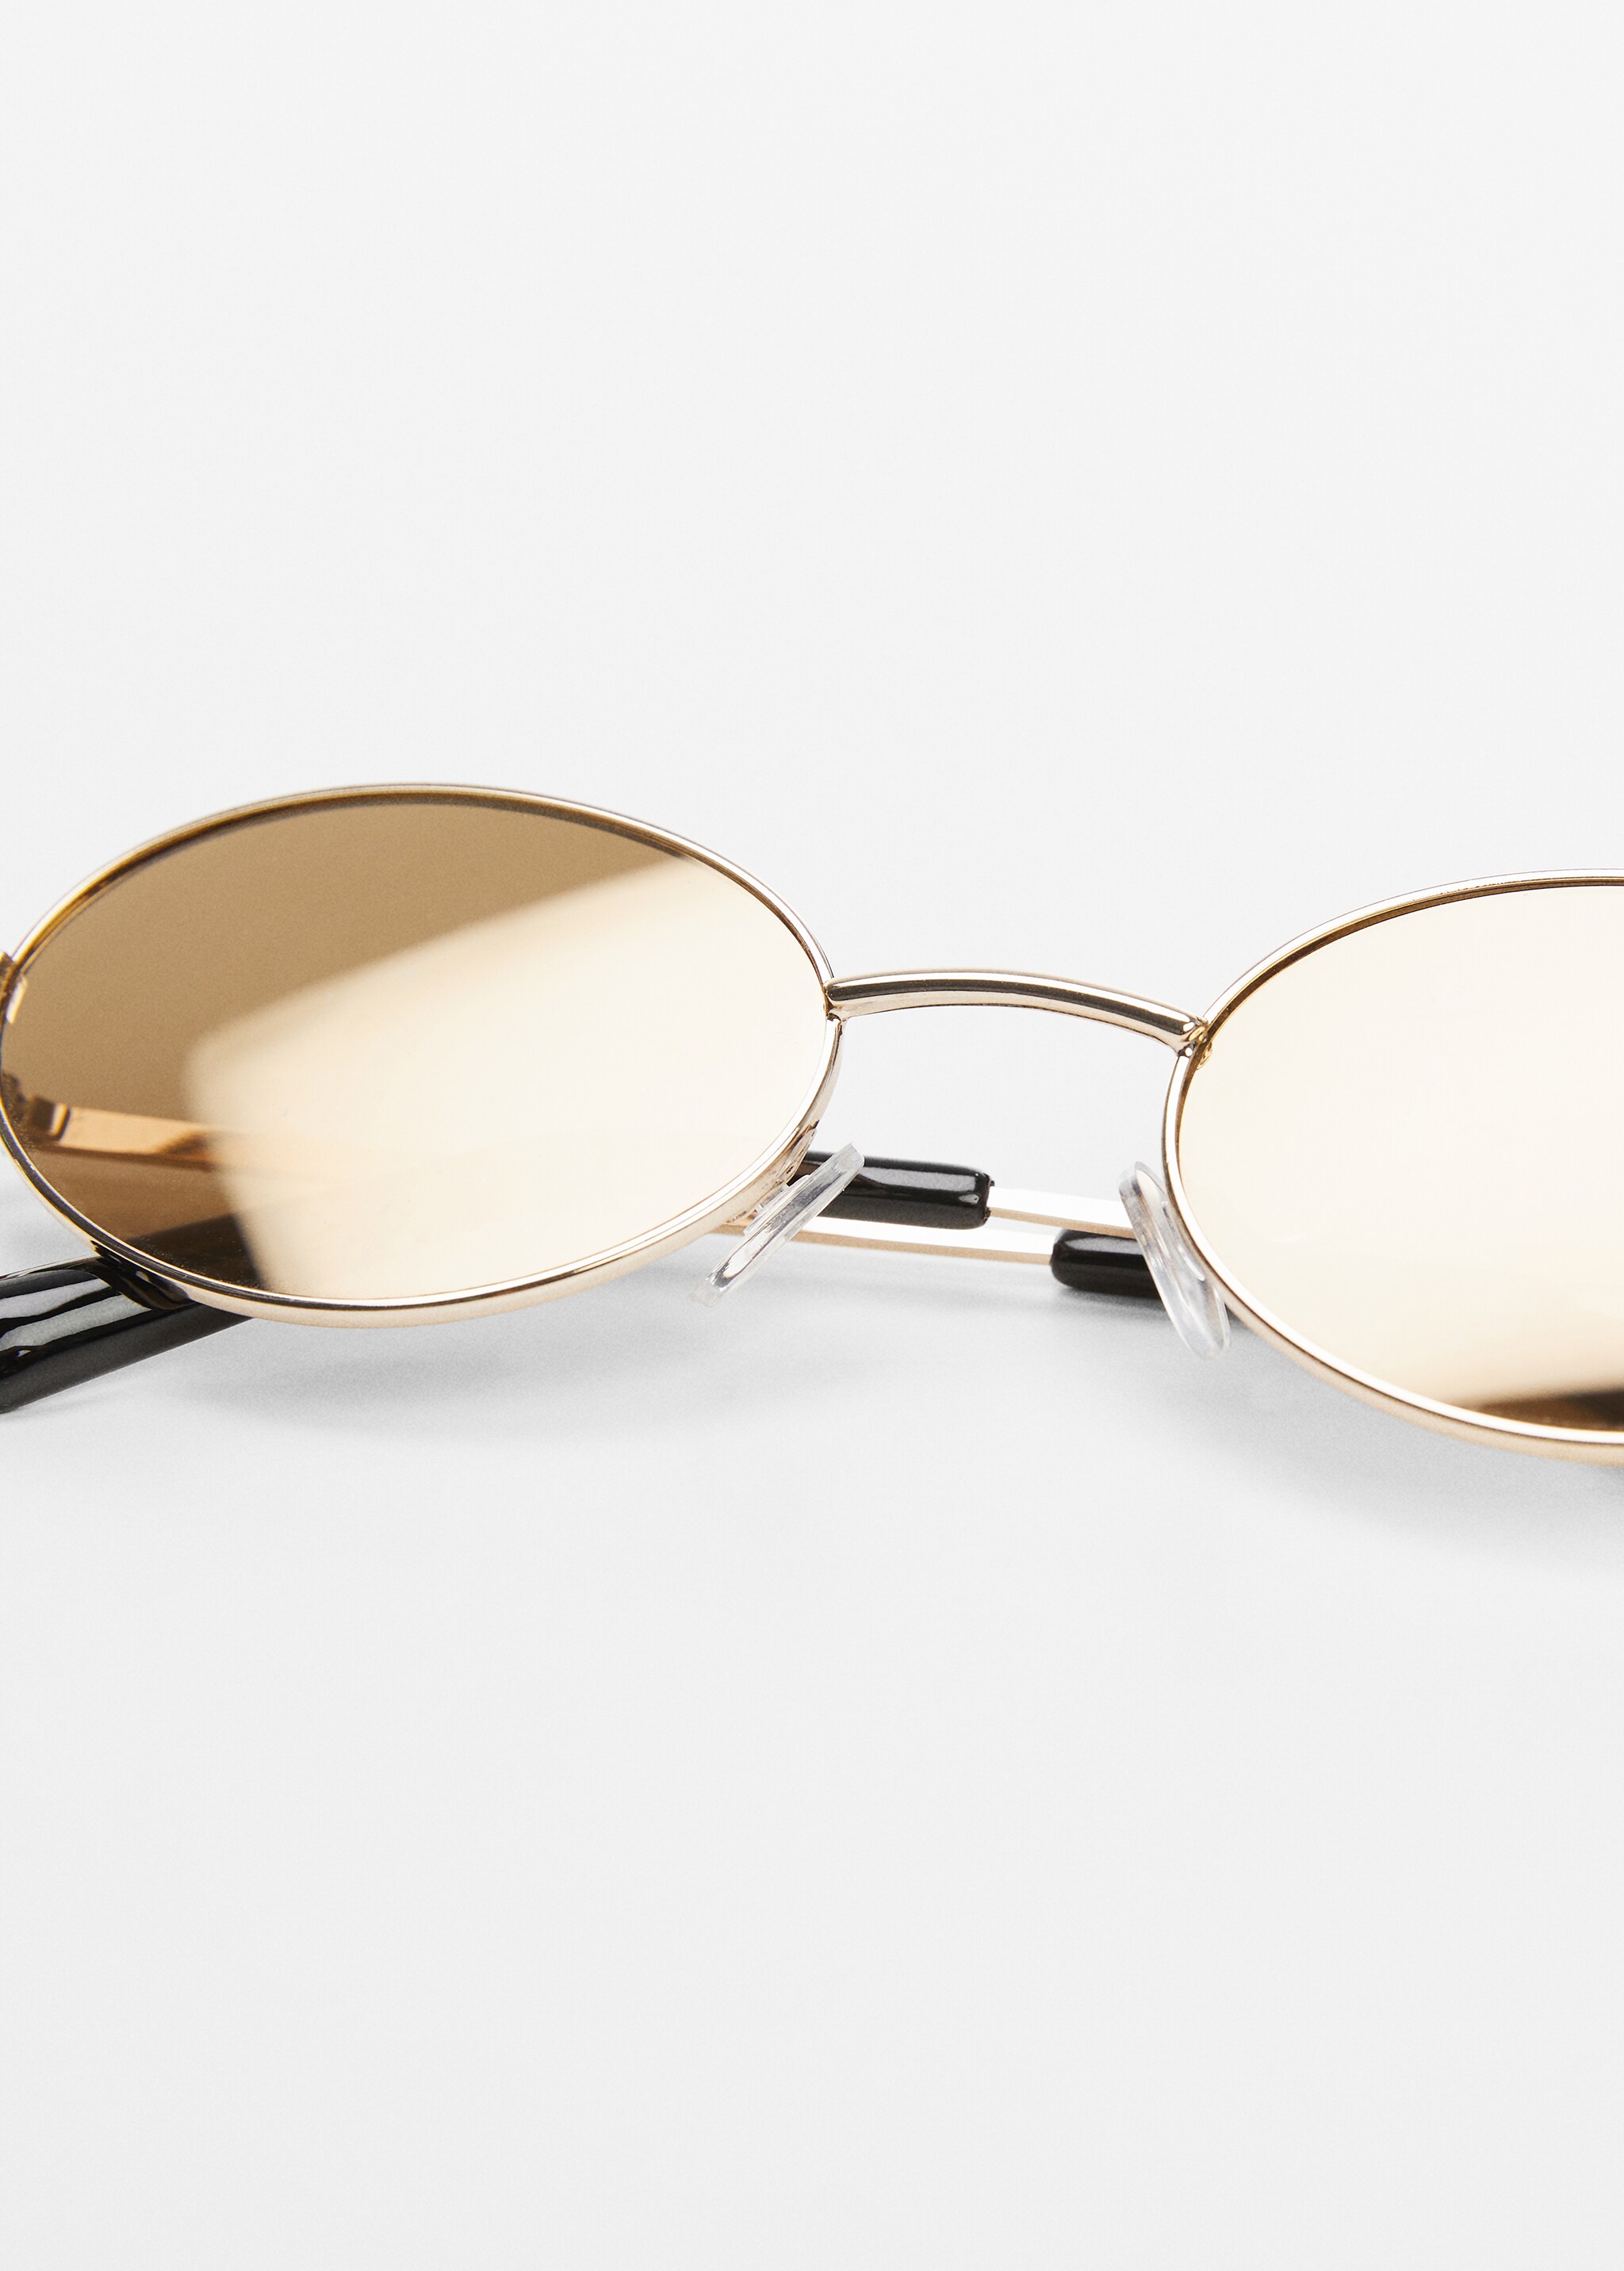 Rounded sunglasses - Details of the article 2